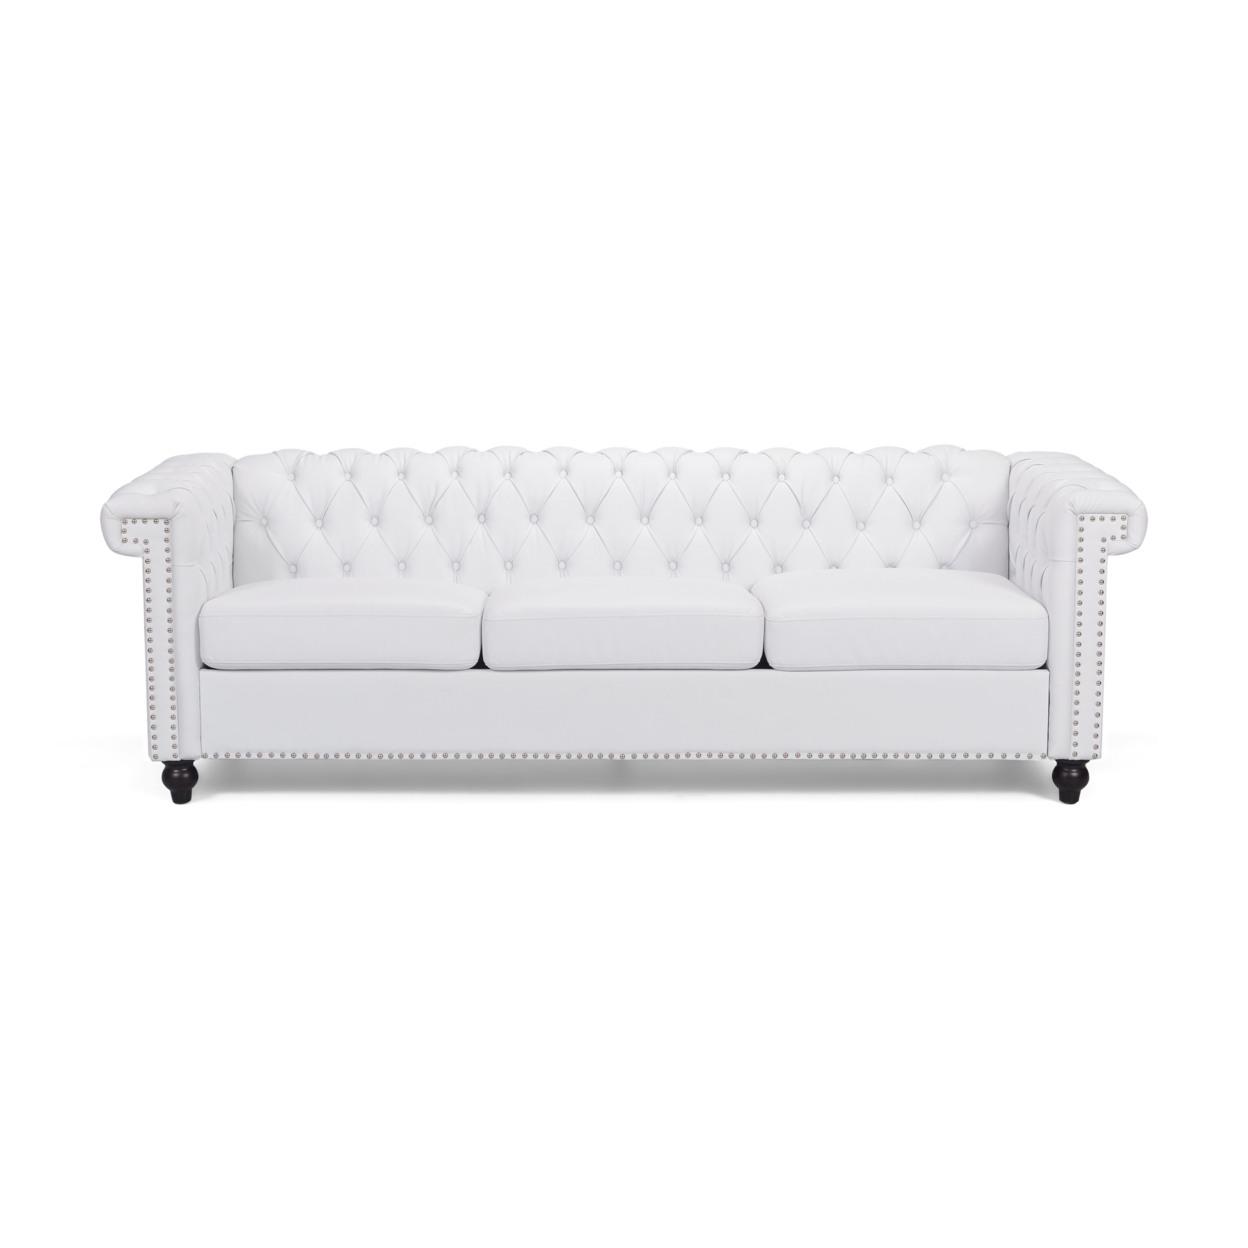 Zyiere Tufted Leather Chesterfield 3 Seater Sofa